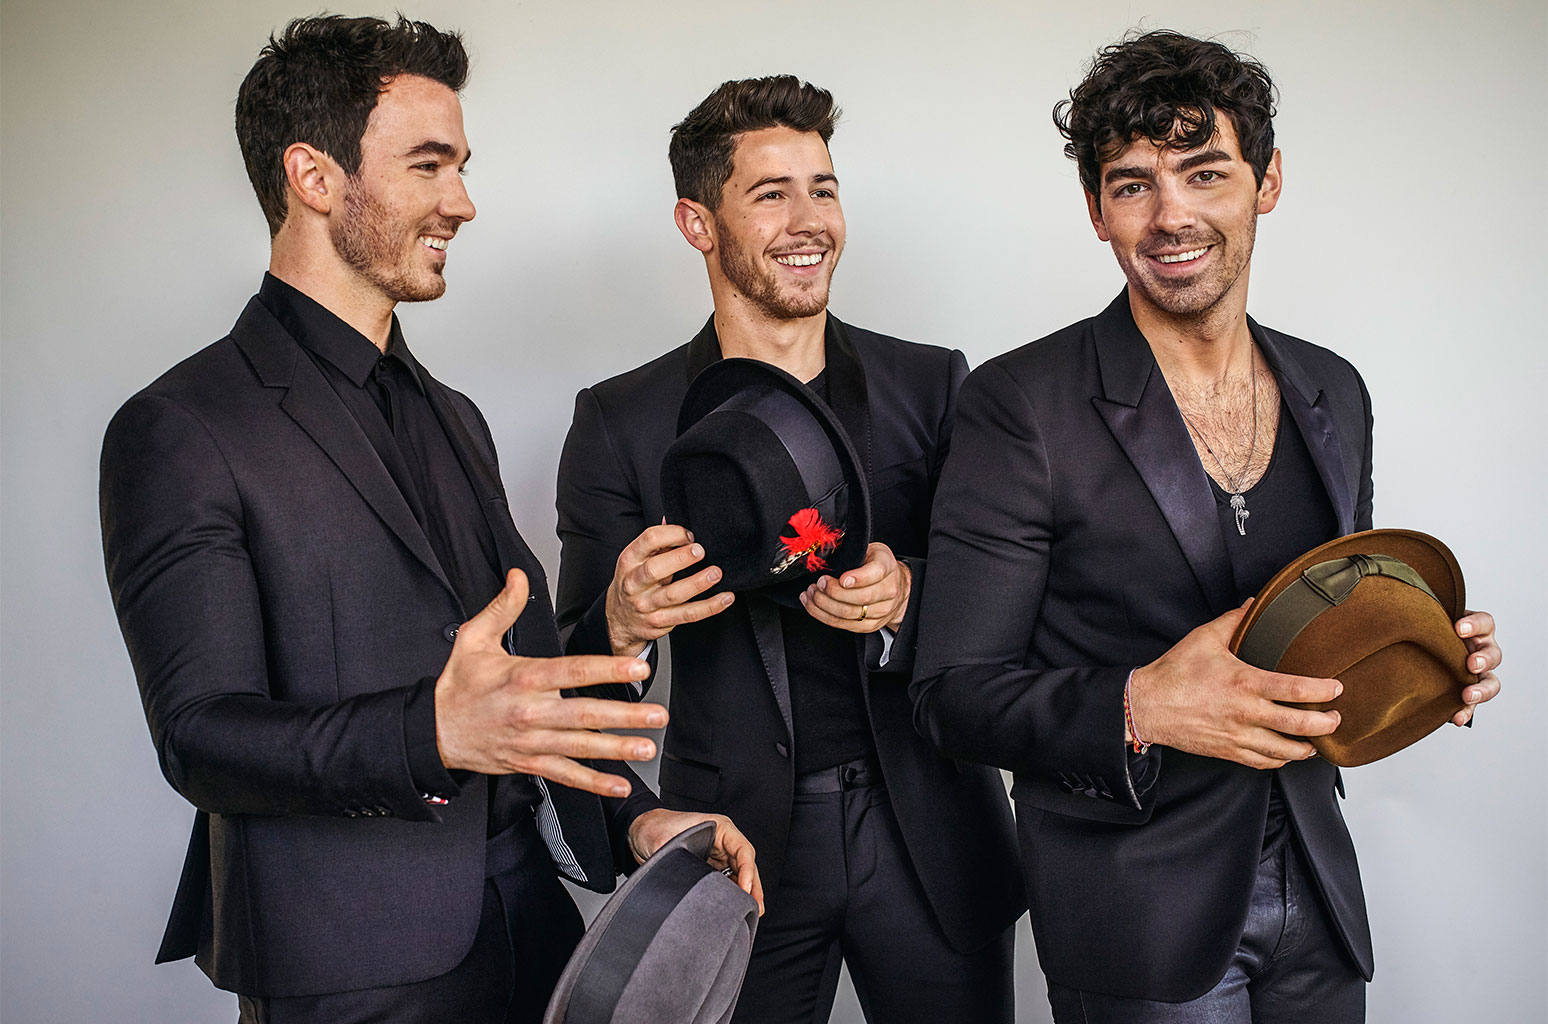 Watch the Jonas Brothers Hilariously Reenact Classic 'Keeping Up With the Kardashians' Fight